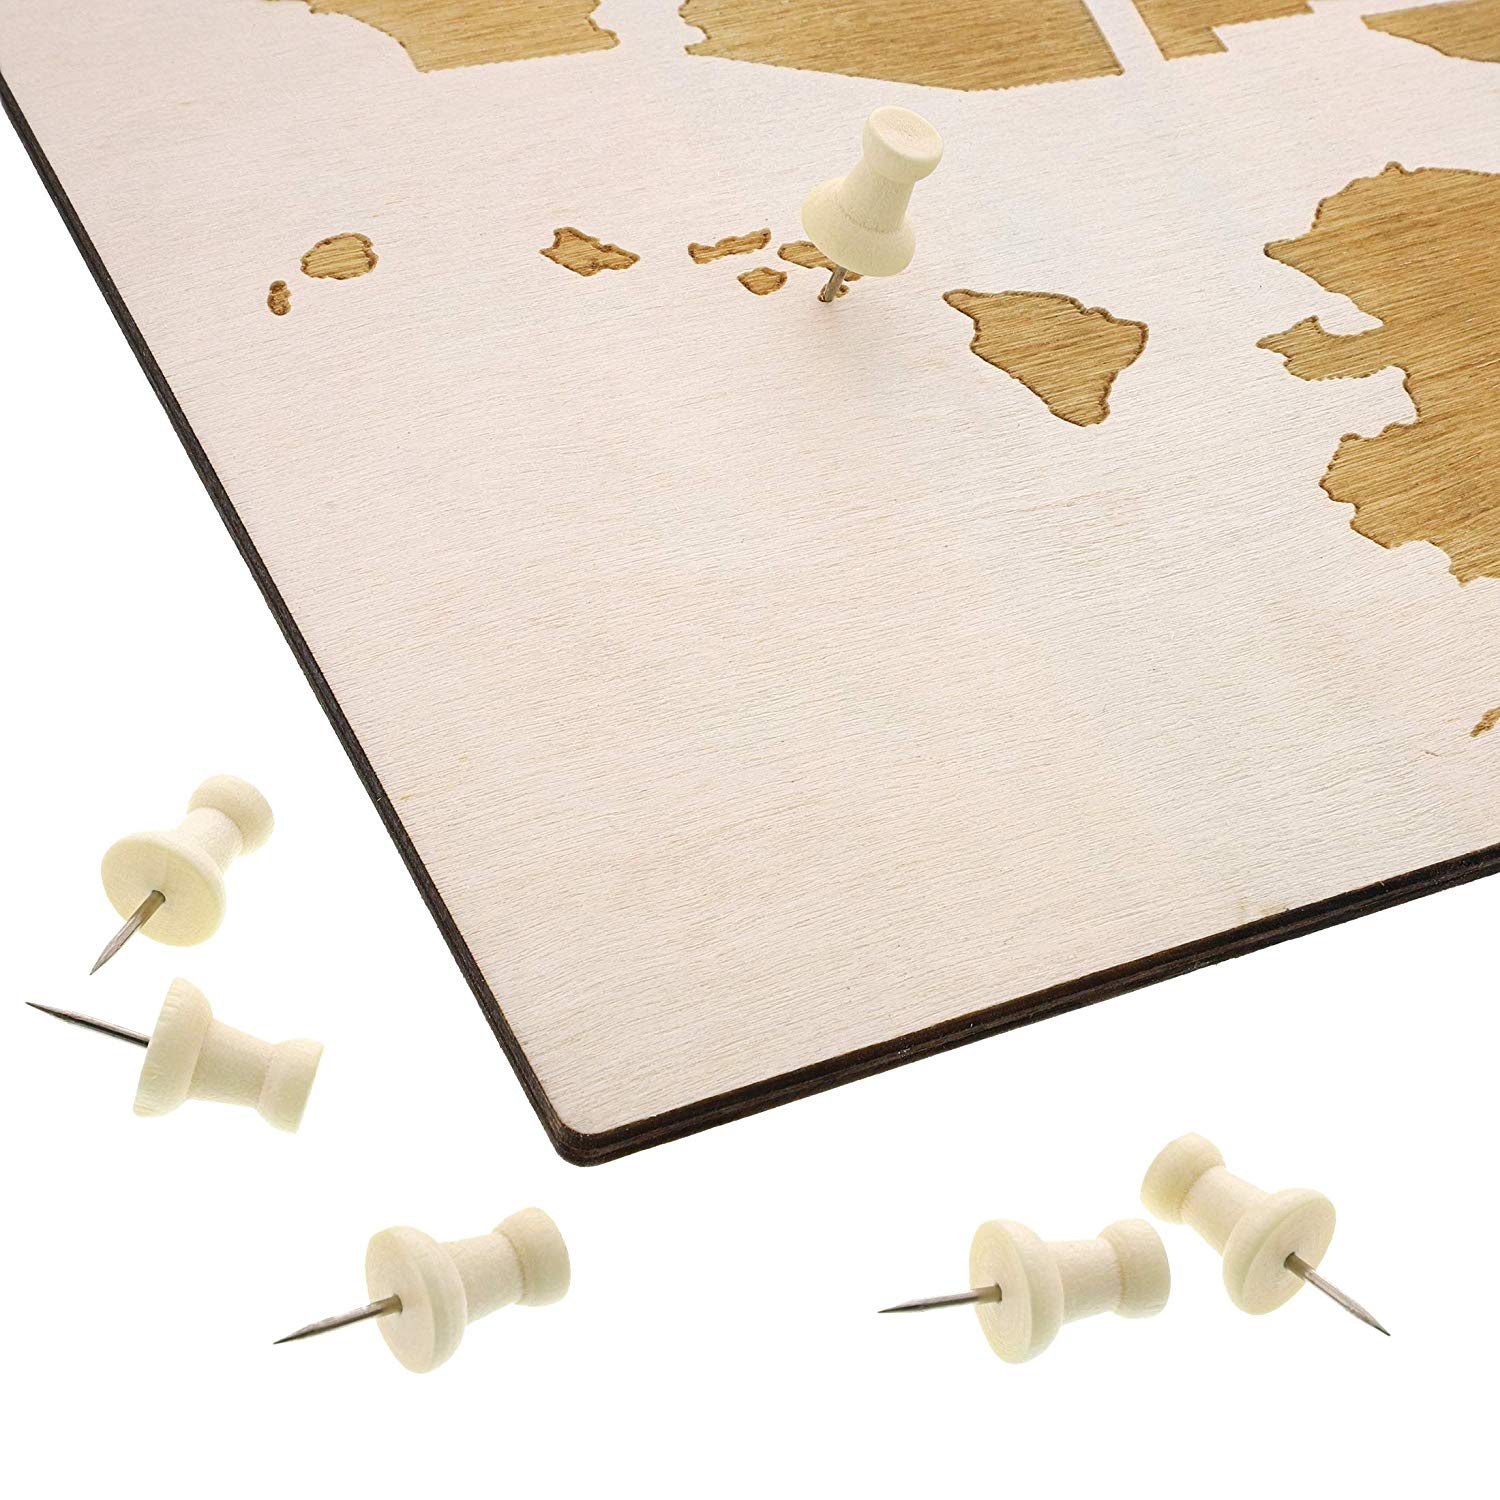 Wooden Cork Board Travel Map with 100 Decorative Push Pins (16.5 x